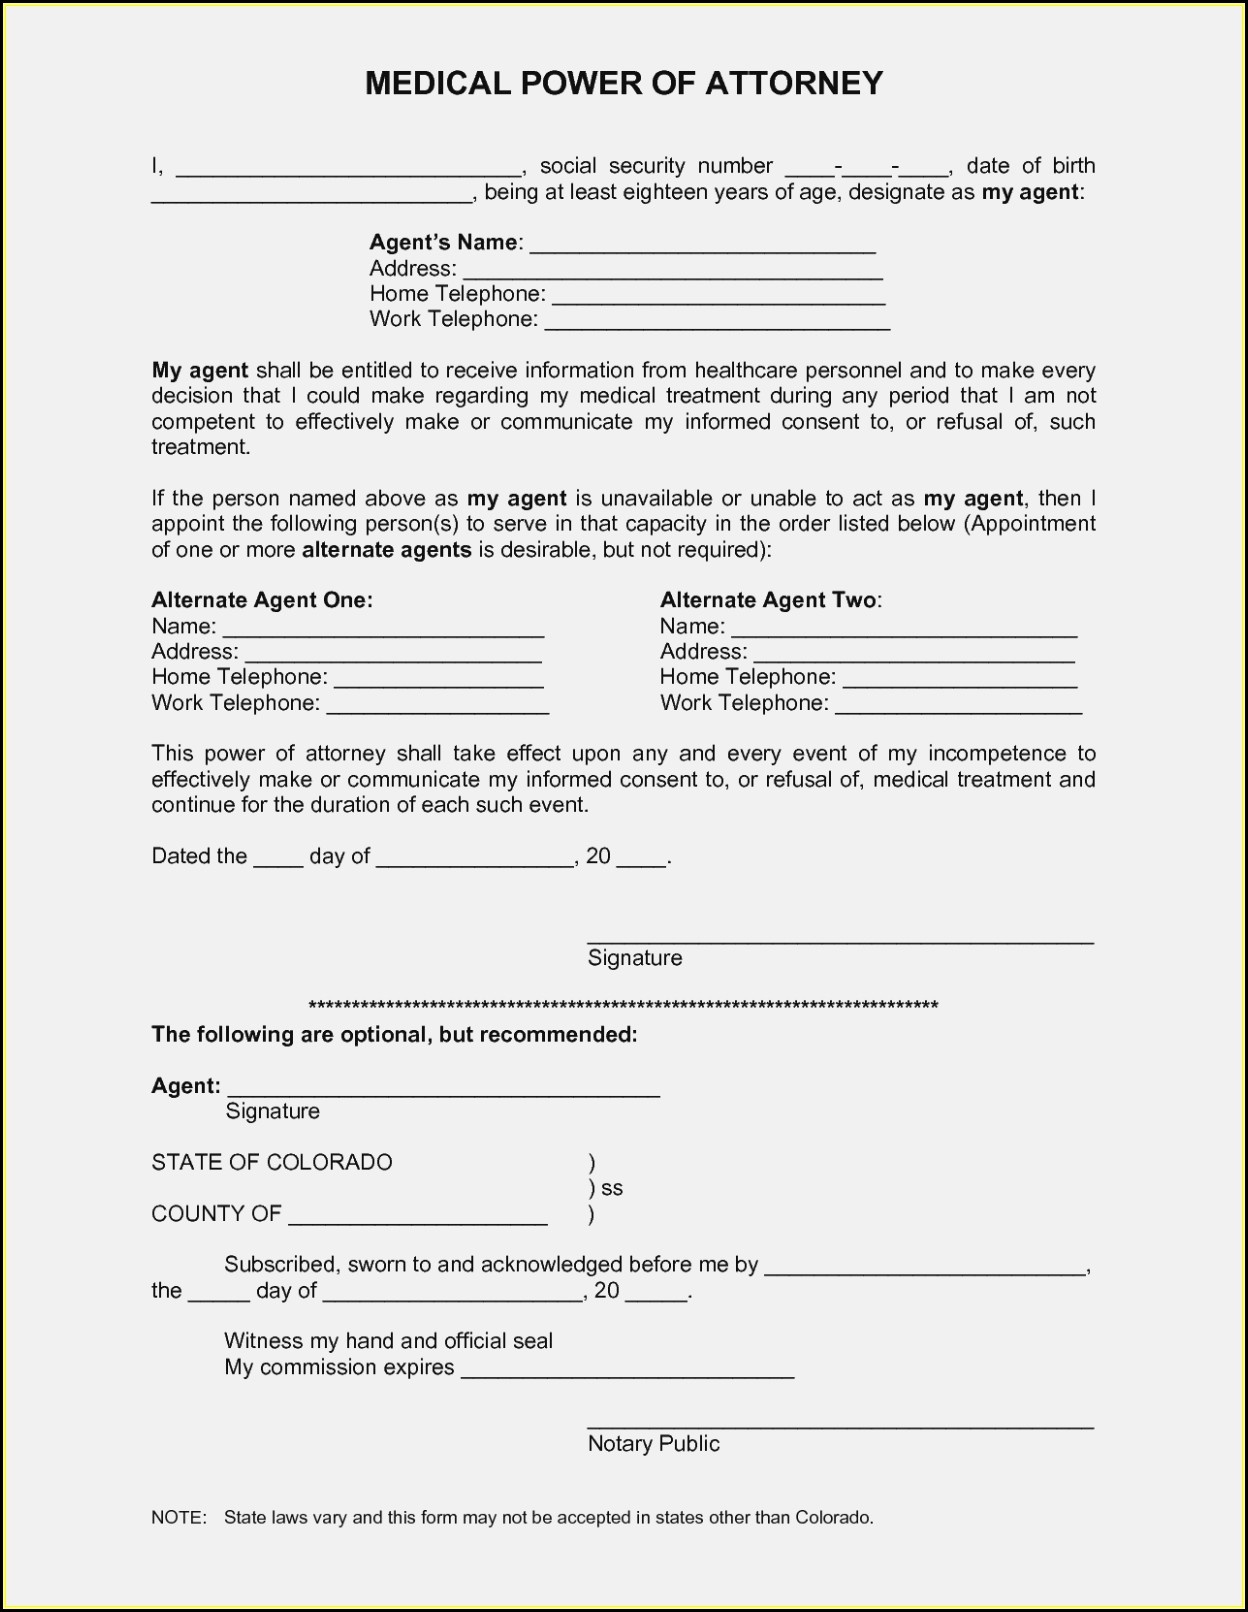 Free Printable Medical Power Of Attorney Forms - Form : Resume - Free Printable Medical Power Of Attorney Forms